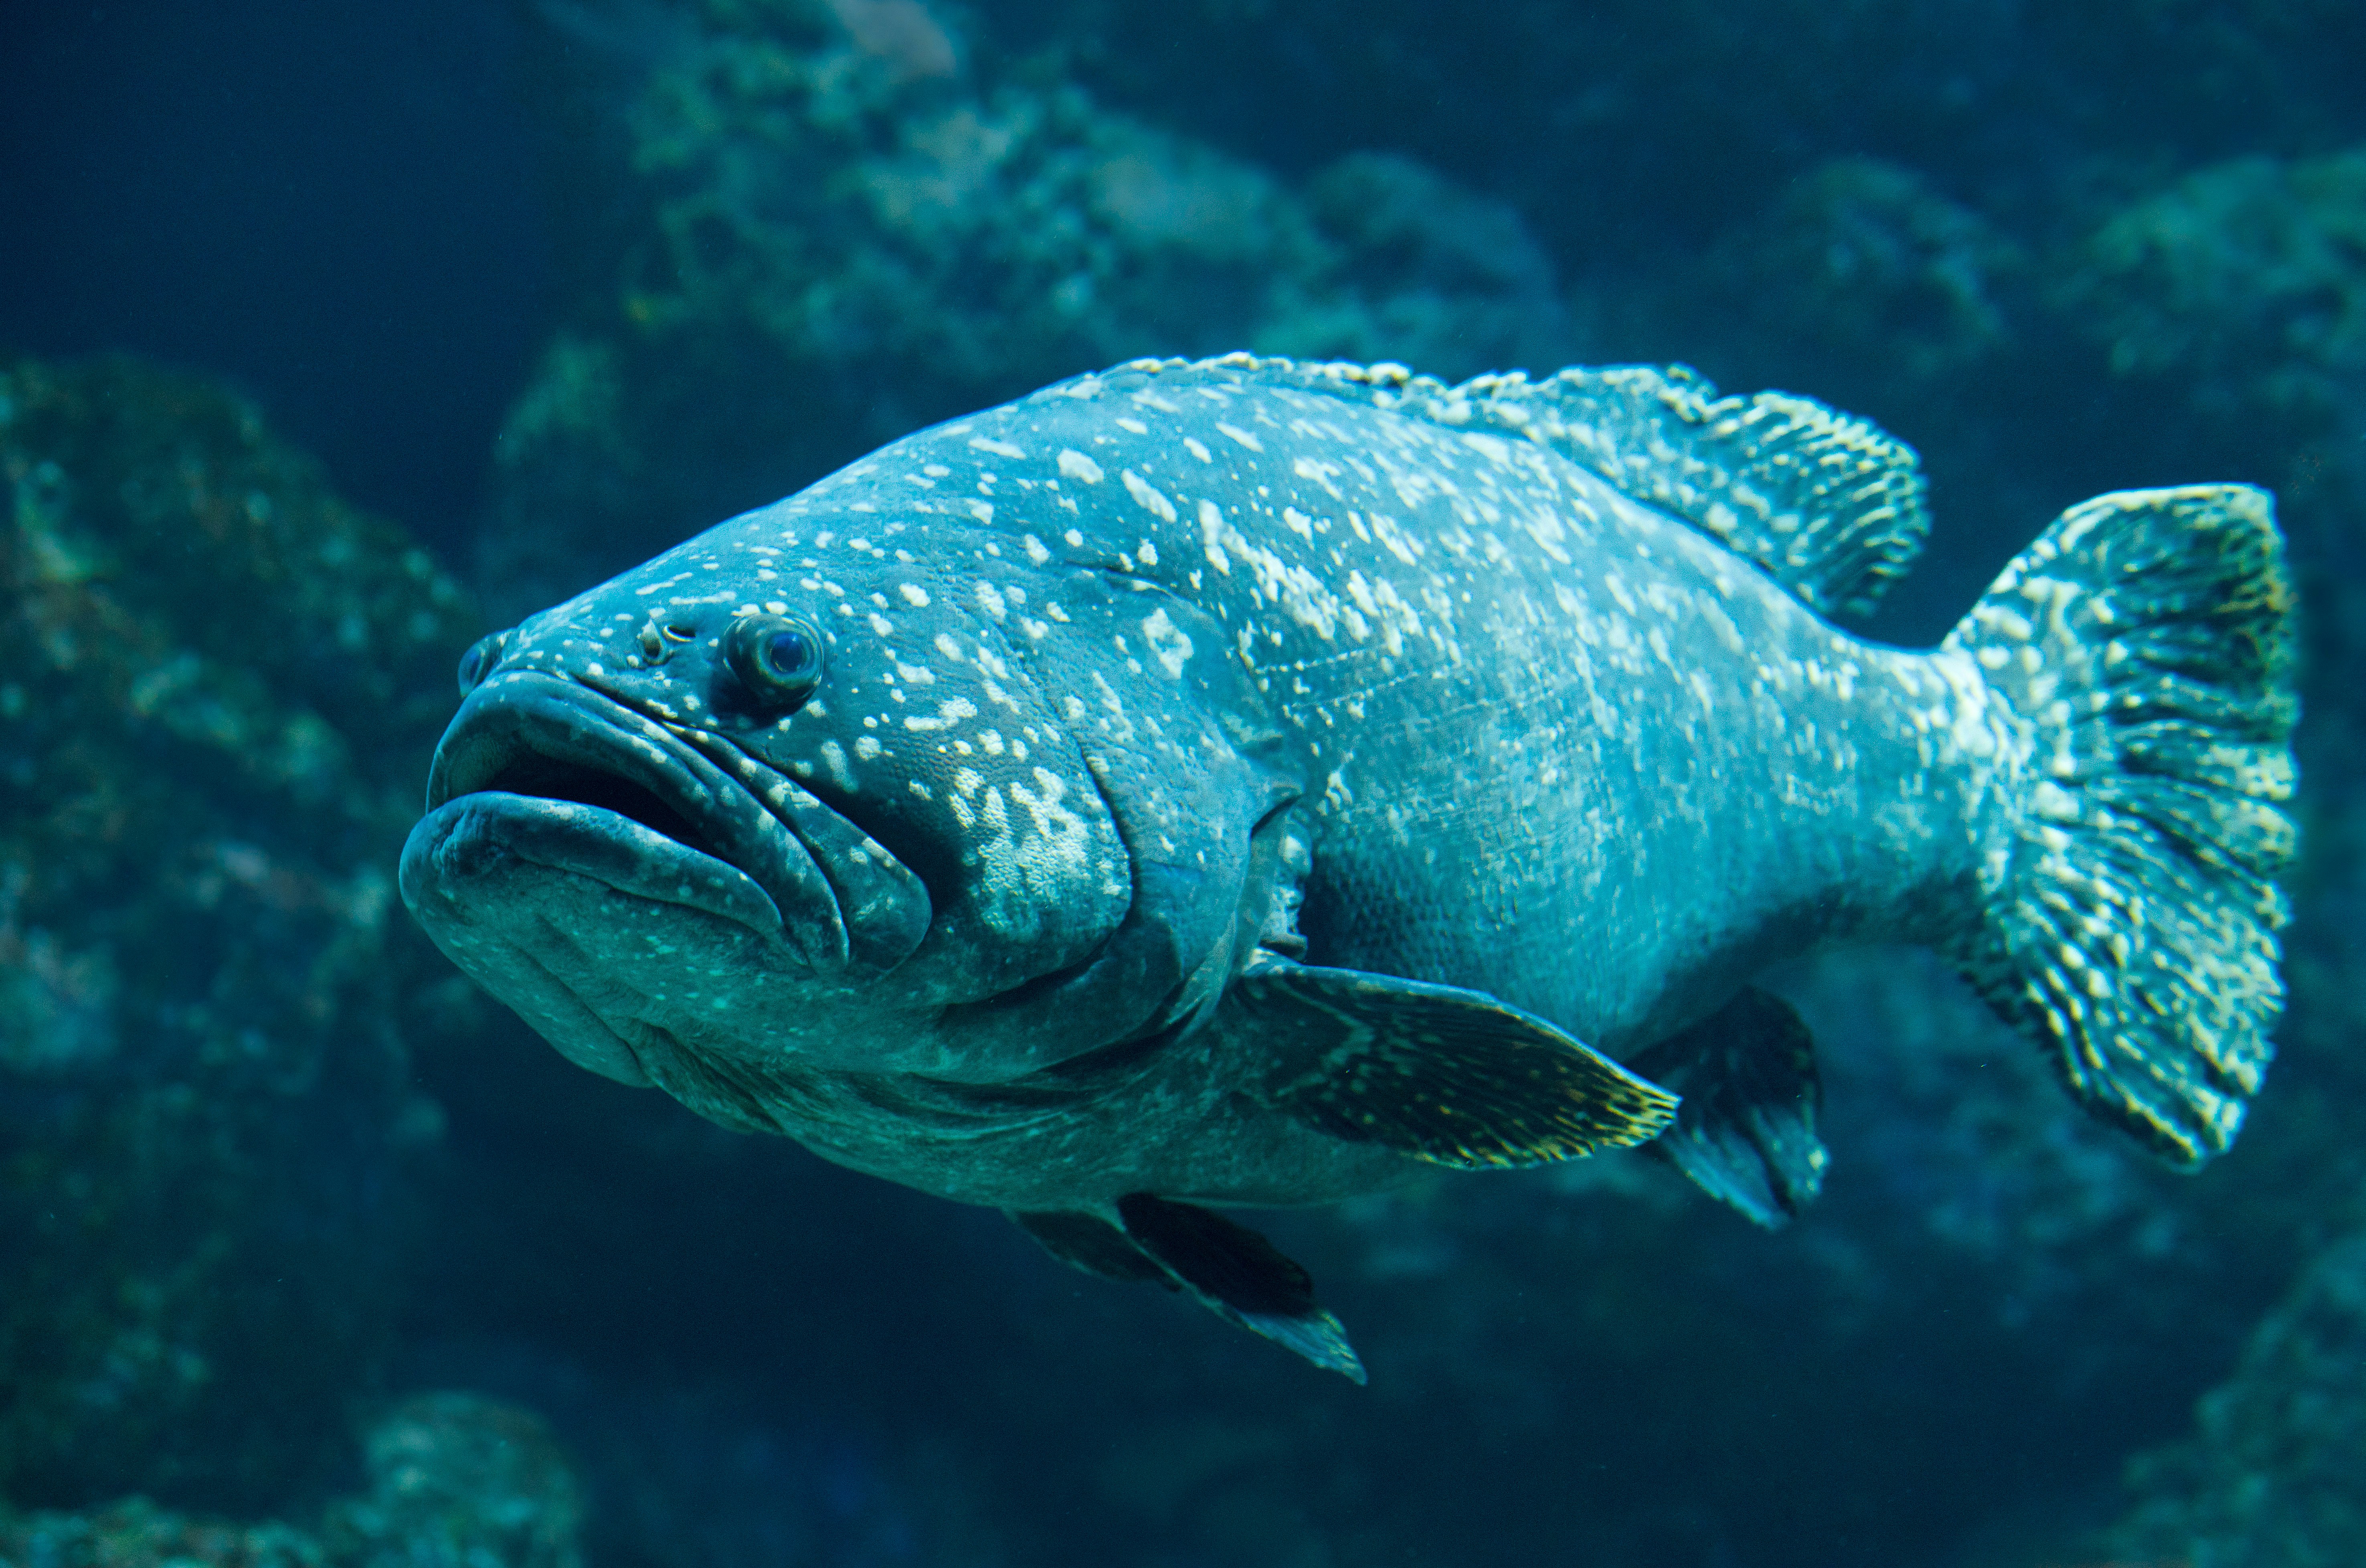 Large grouper fish swimming in deep water